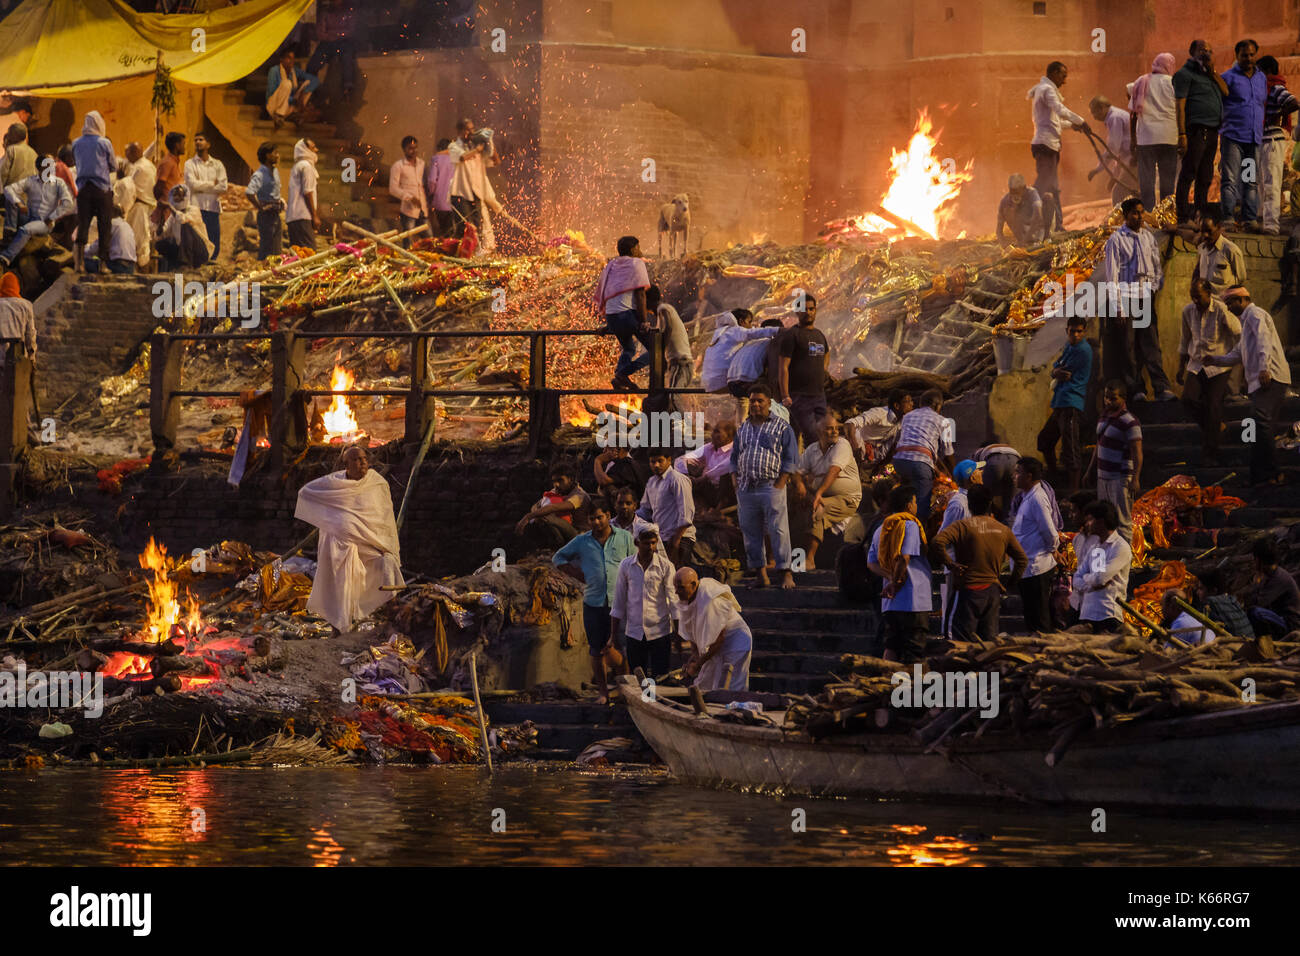 VARANASI, INDIA - CIRCA NOVEMBER 2016: Cremation in progess at the Manikarnika Ghat. This is is one of the oldest ghats in Varanasi, and most known fo Stock Photo